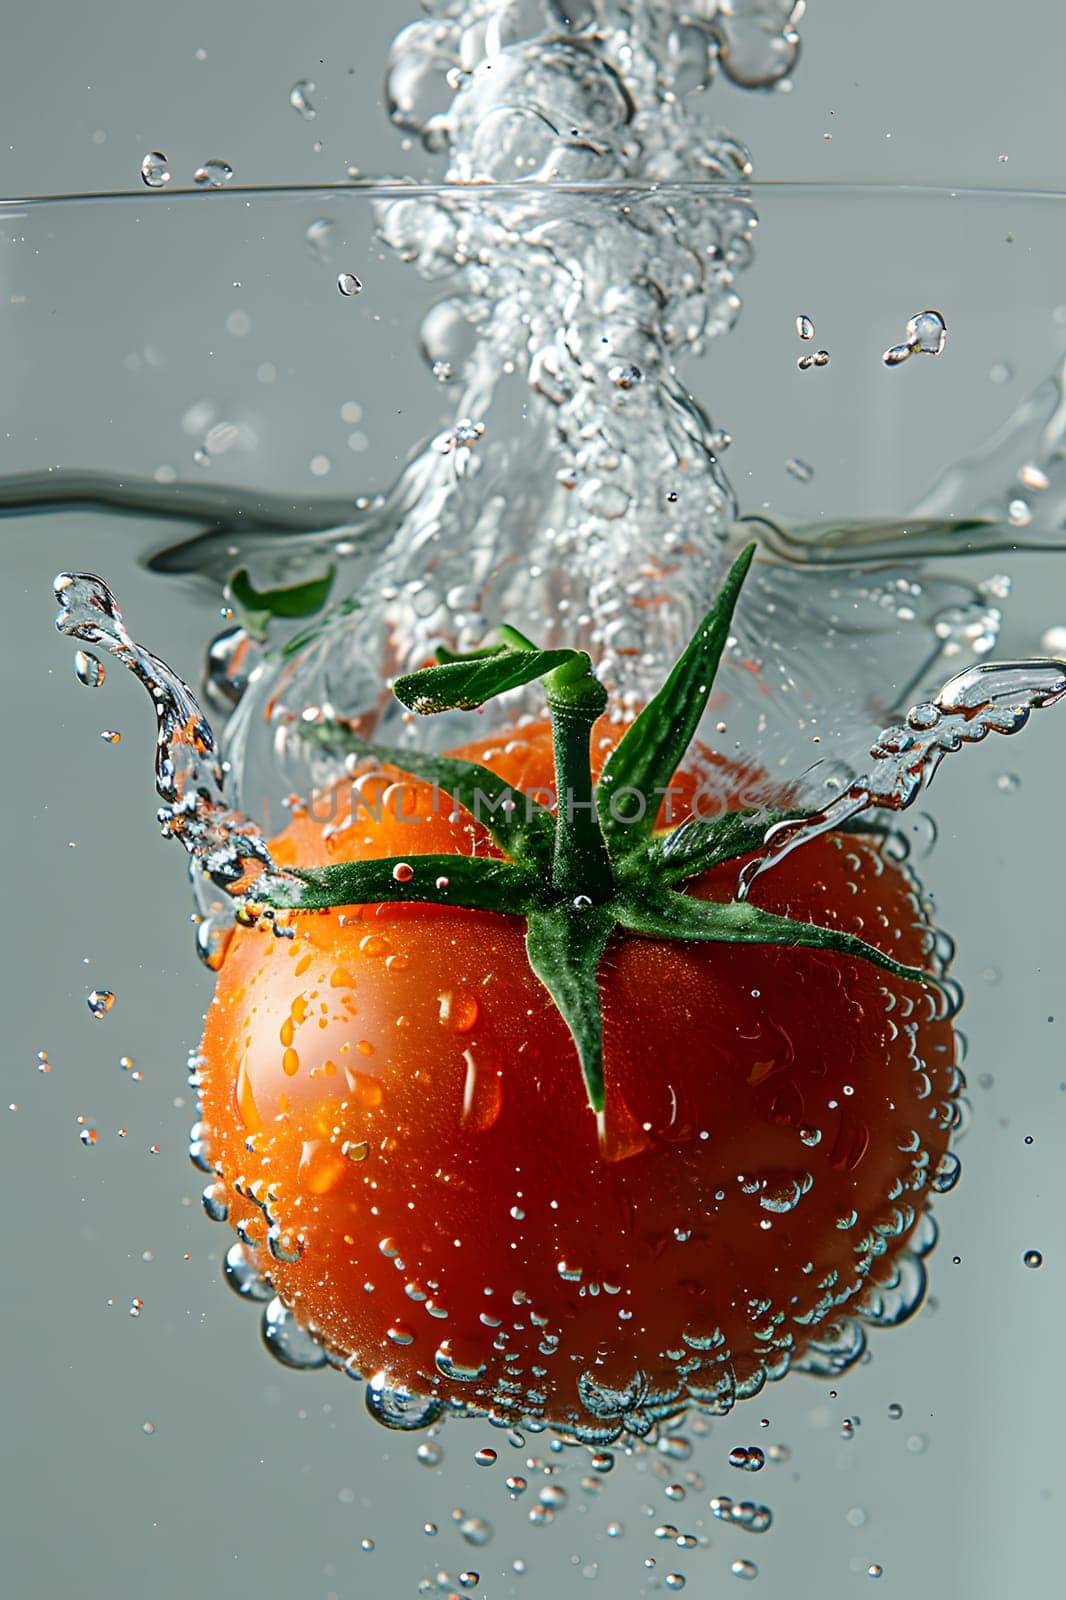 A tomato is dropped into a glass of water, creating a splash by Nadtochiy